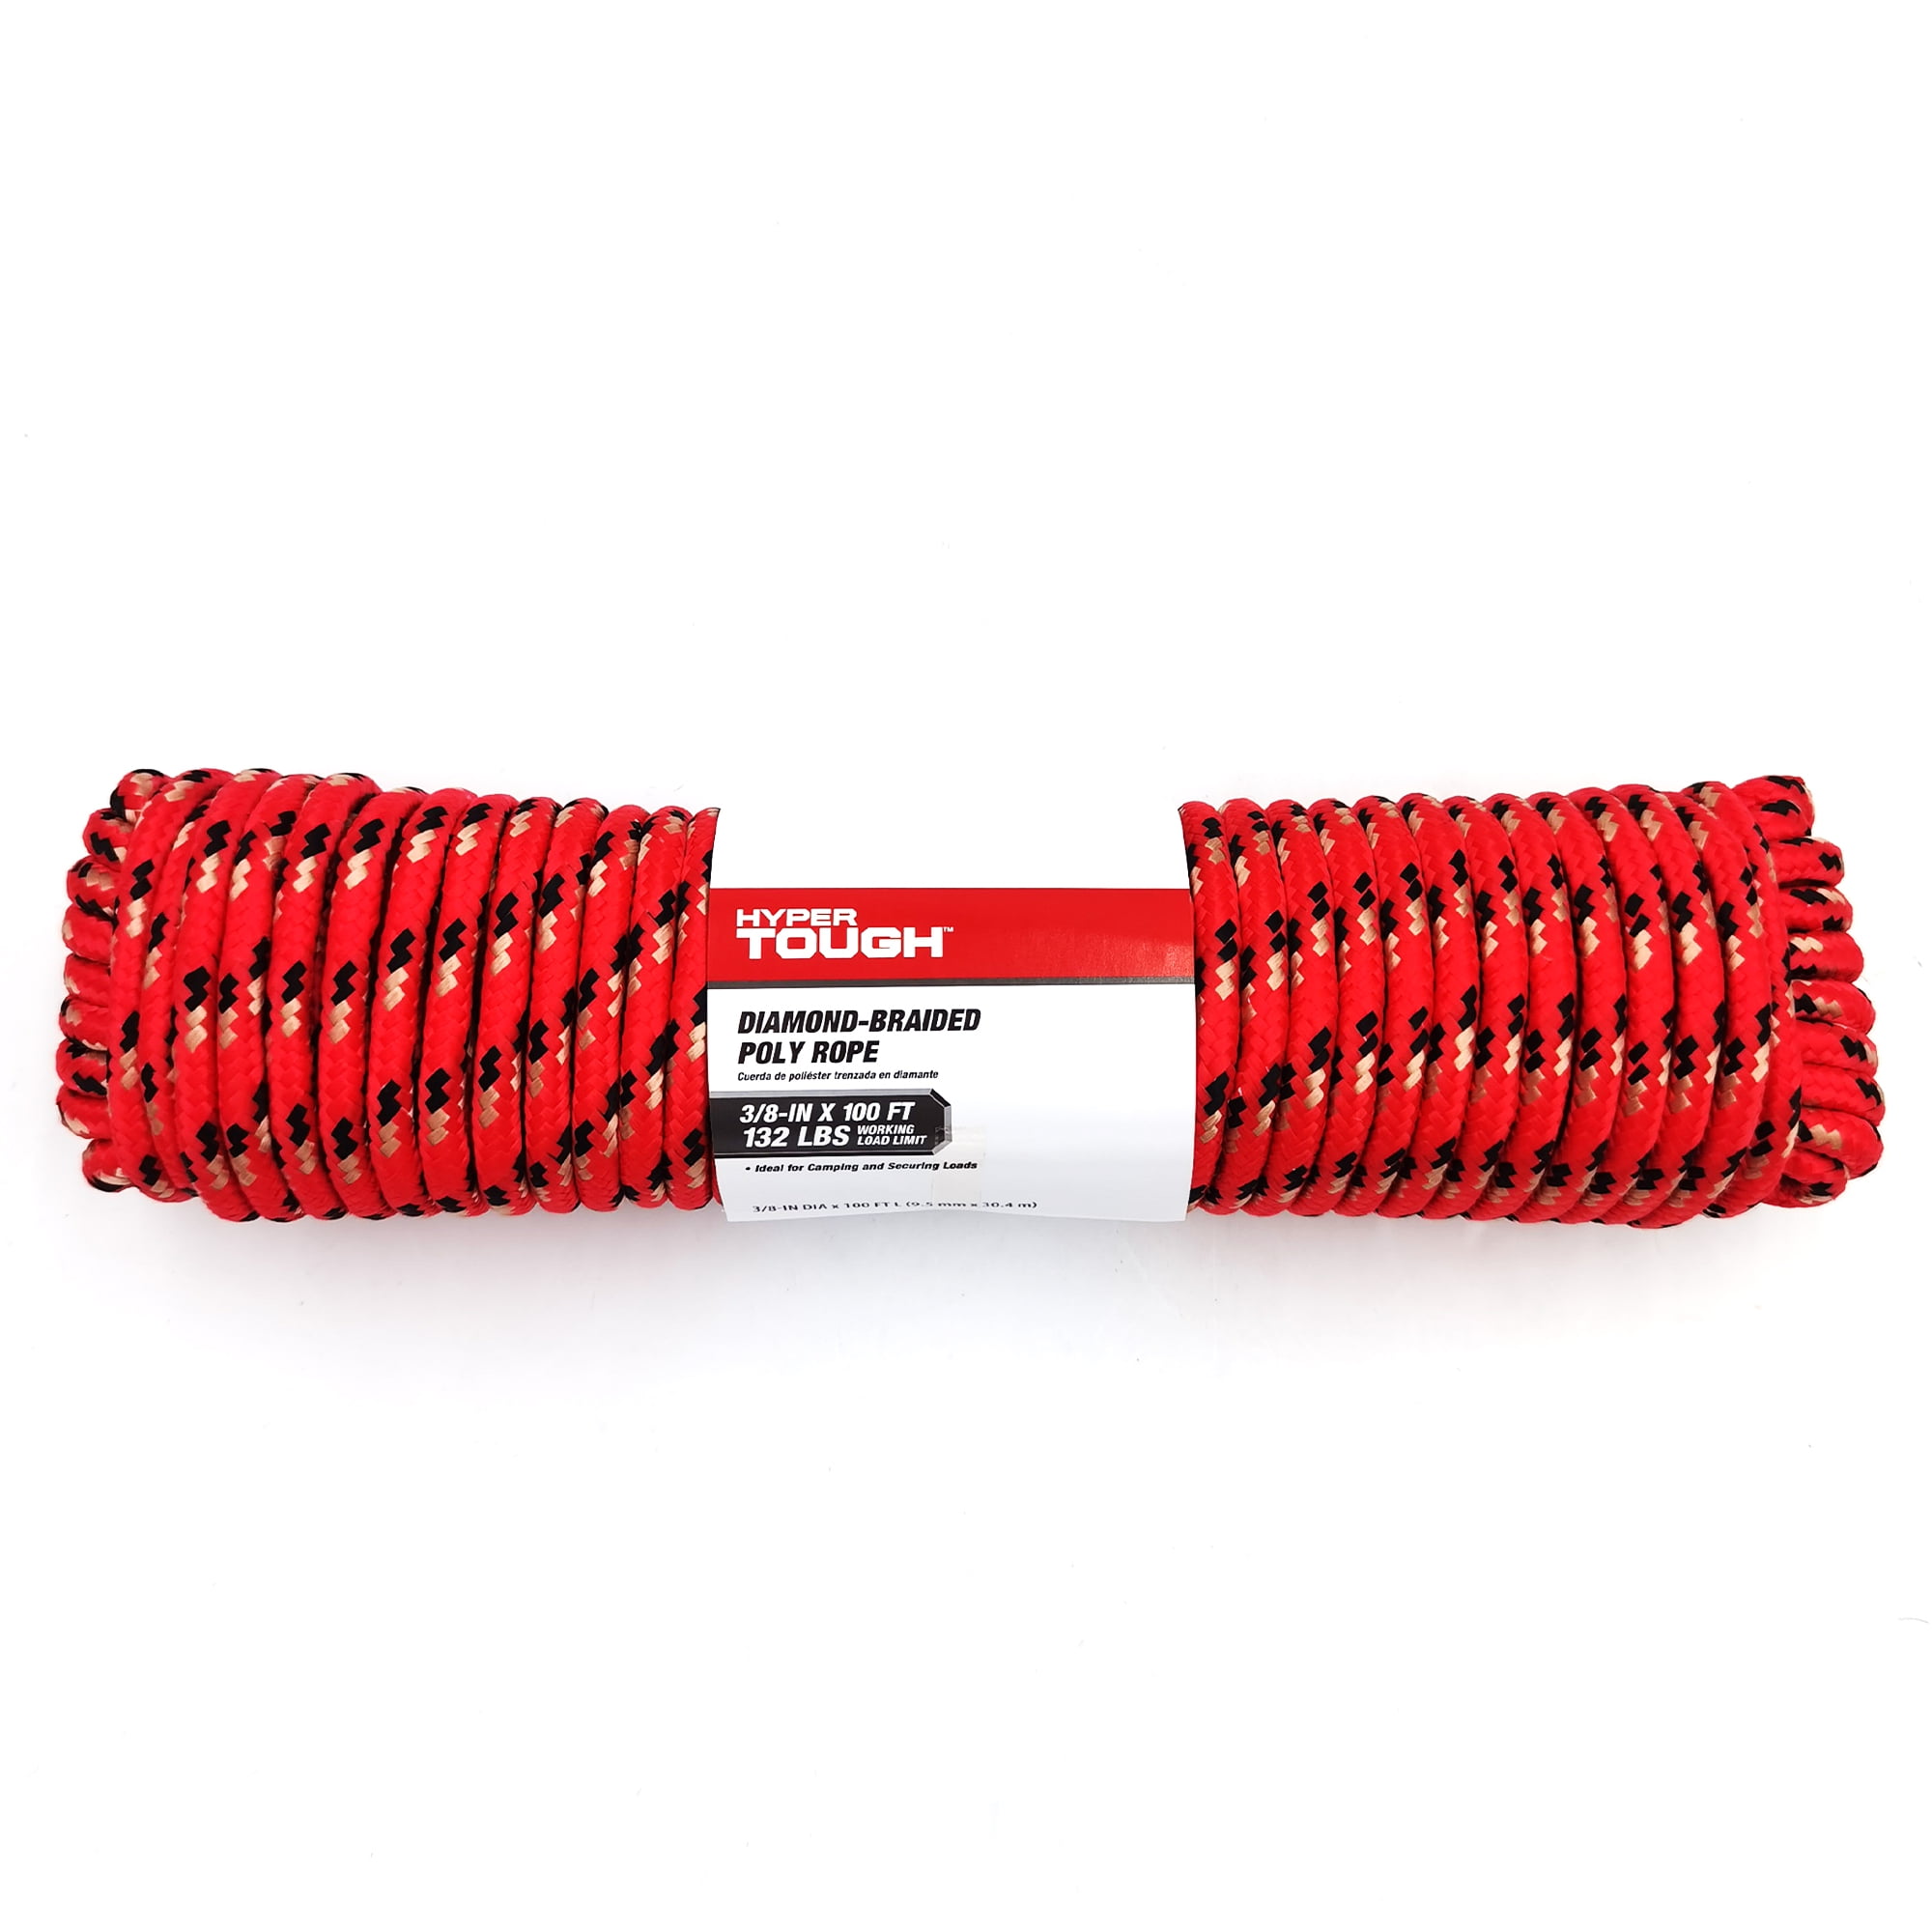 2 pack 100FT X 3/8in  Diamond Braid Rope Blue/White-Blue/Red 